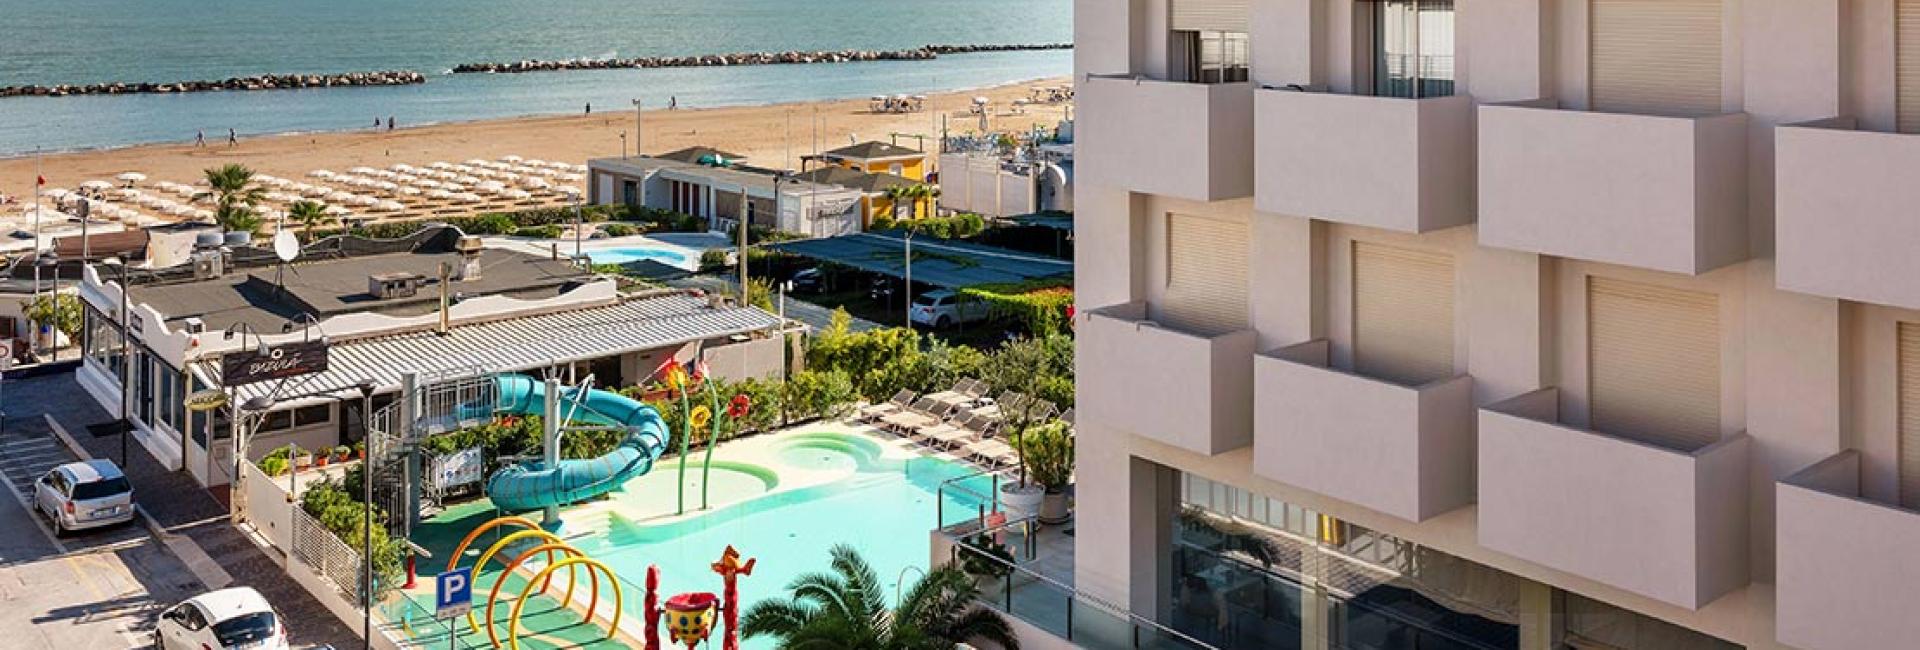 cattolicafamilyresort en holiday-in-cattolica-premium-booking-special-rates 010